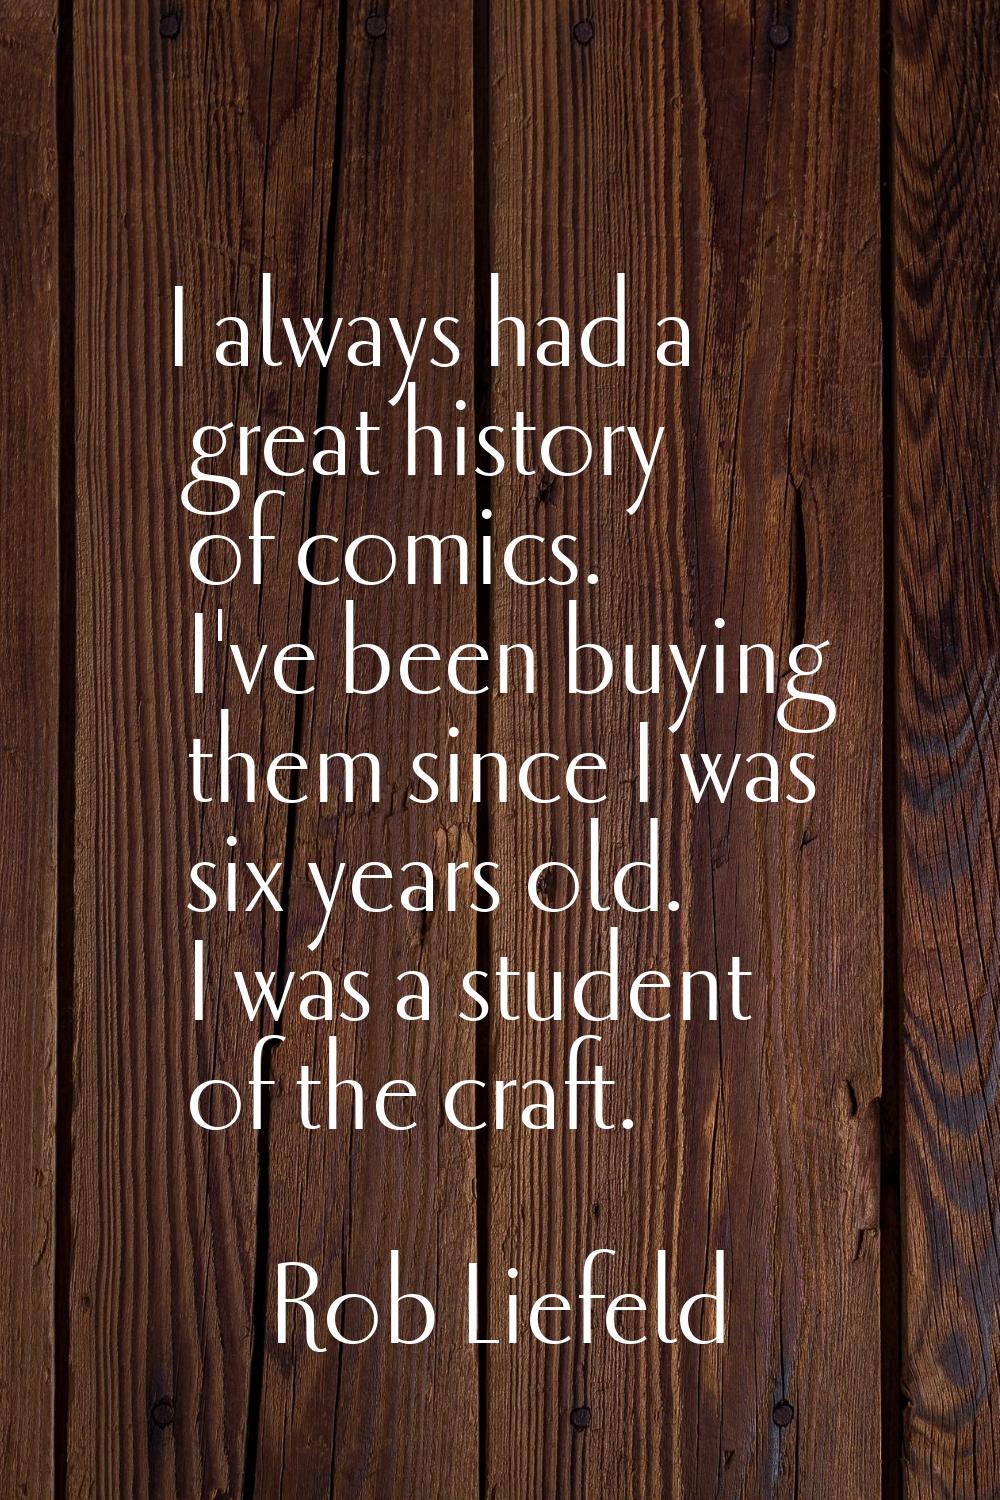 I always had a great history of comics. I've been buying them since I was six years old. I was a st